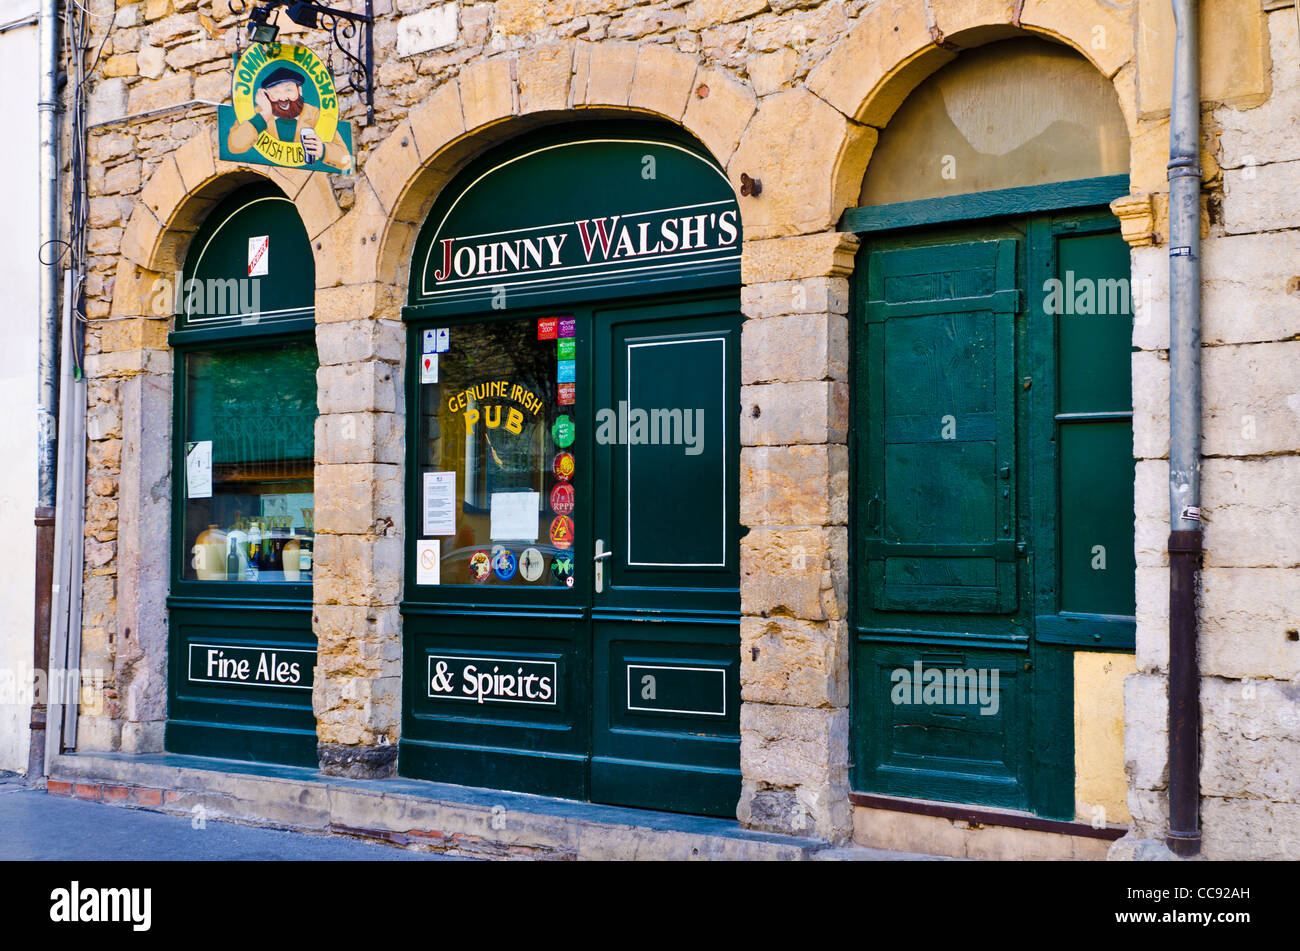 Johnny Walsh's Irish Pub in old town Vieux Lyon, France (UNESCO World Heritage Site) Stock Photo